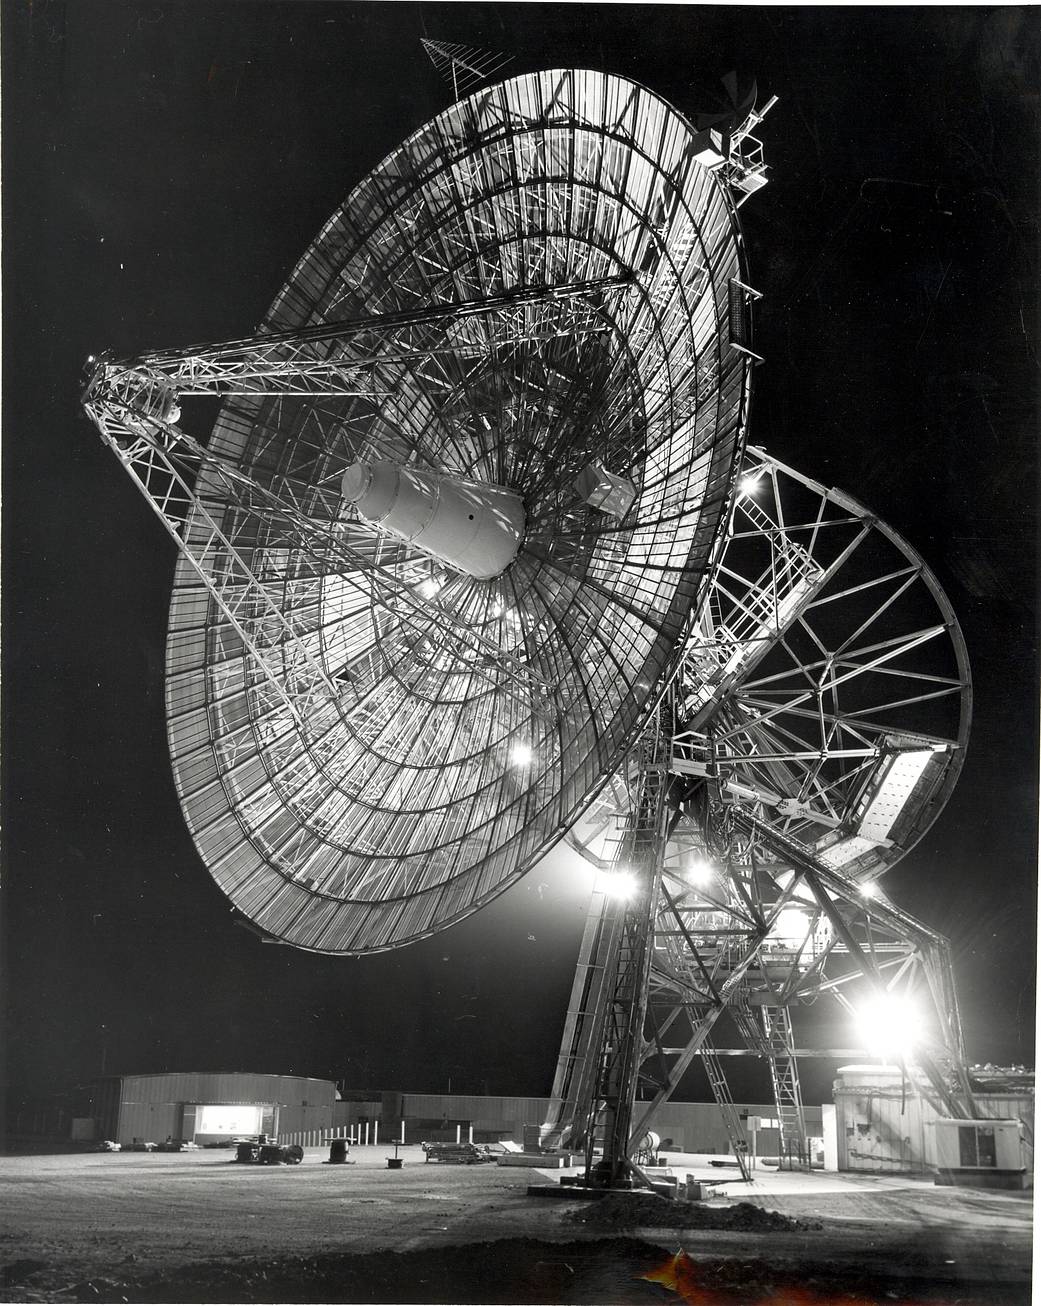 This 26 meter (85 foot) antenna operated in Woomera (Island Lagoon), Australia at Deep Space Station (DSS) 41, established in Au